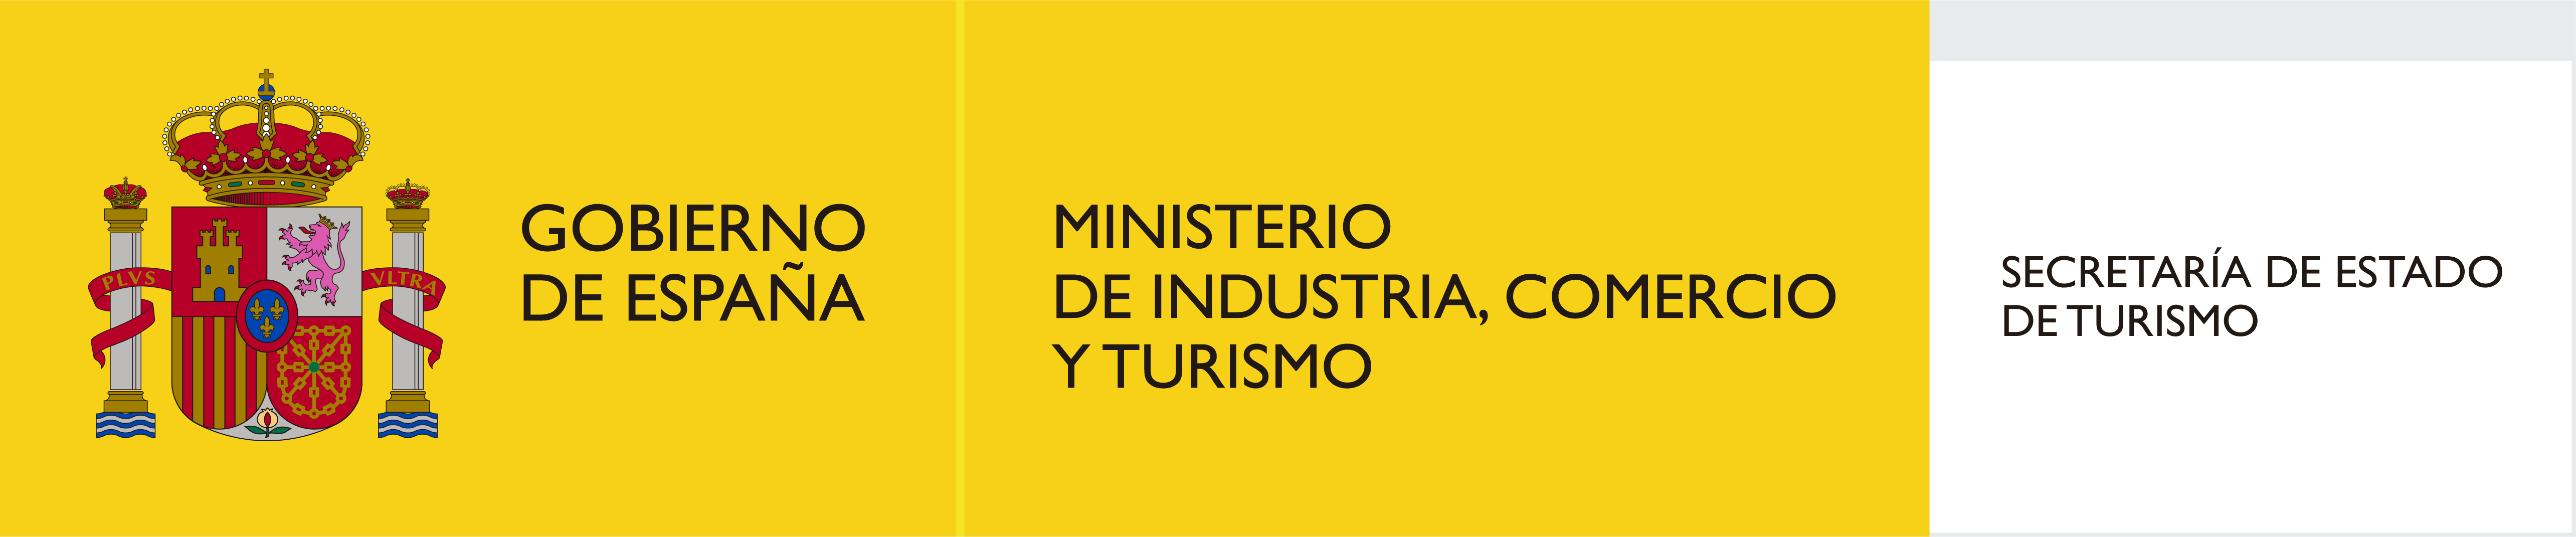 Spain_-_Secretariat_of_State_for_Tourism_(Ministry_of_Industry,_Trade,_and_Tourism)